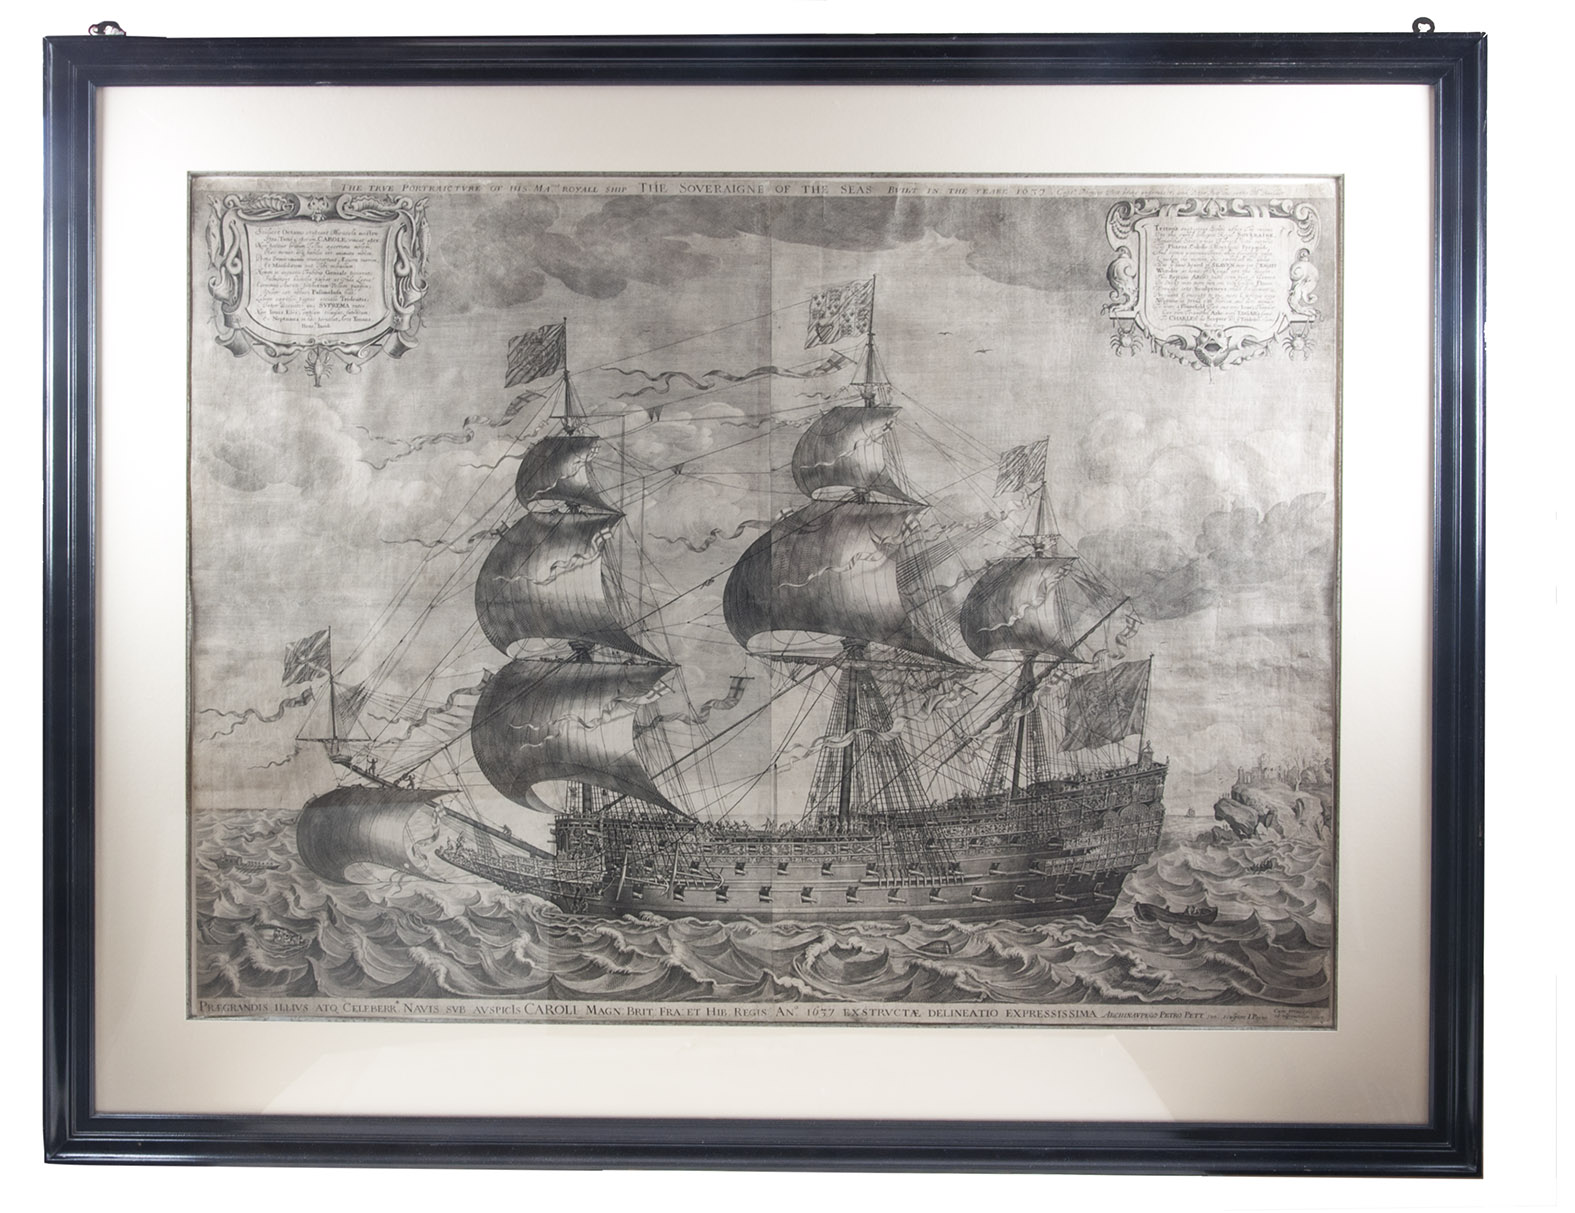 [PRINT - WARSHIP]. PAYNE, John. - The true portraicture of His Ma[jes]ties. royall ship the Soveraigne of the Seas built in the yeare 1637. [London, Peter Pett, 1637/38]. Large engraving (66.5 x 91 cm), printed from two plates on two sheets, assembled to make a single print. With title in English across the head, a slightly different Latin title across the foot (both outside the image area), Payne's name and privilege to the right of the Latin title, and two decorated cartouches with laudatory verses in the upper corners. In passepartout (not mounted) and easily detachable framed (90 x 114 cm).